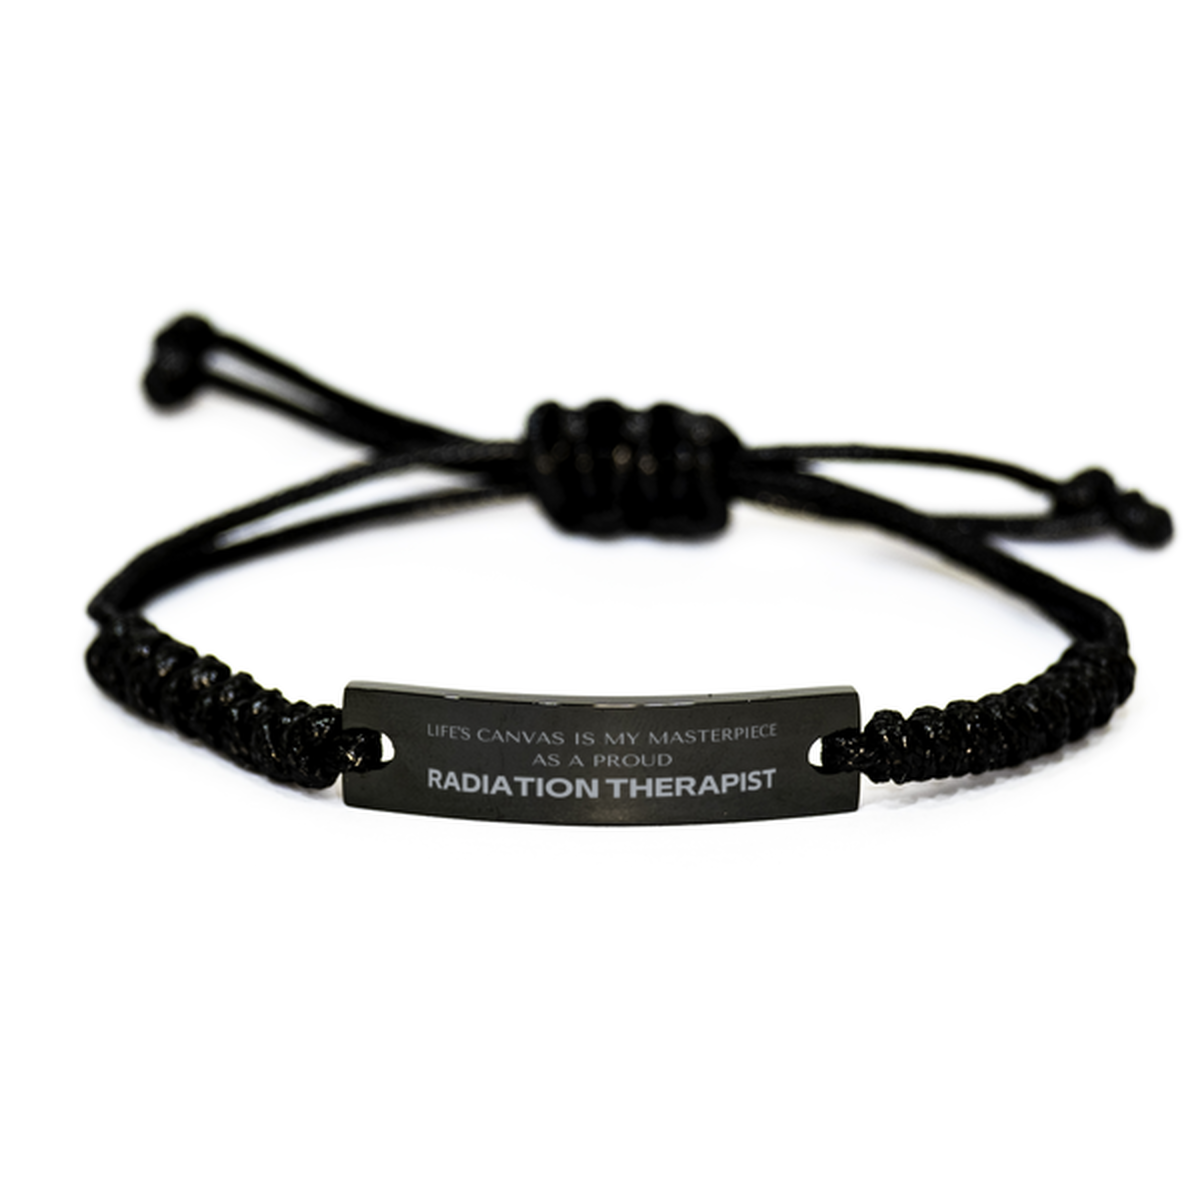 Proud Radiation Therapist Gifts, Life's canvas is my masterpiece, Epic Birthday Christmas Unique Black Rope Bracelet For Radiation Therapist, Coworkers, Men, Women, Friends